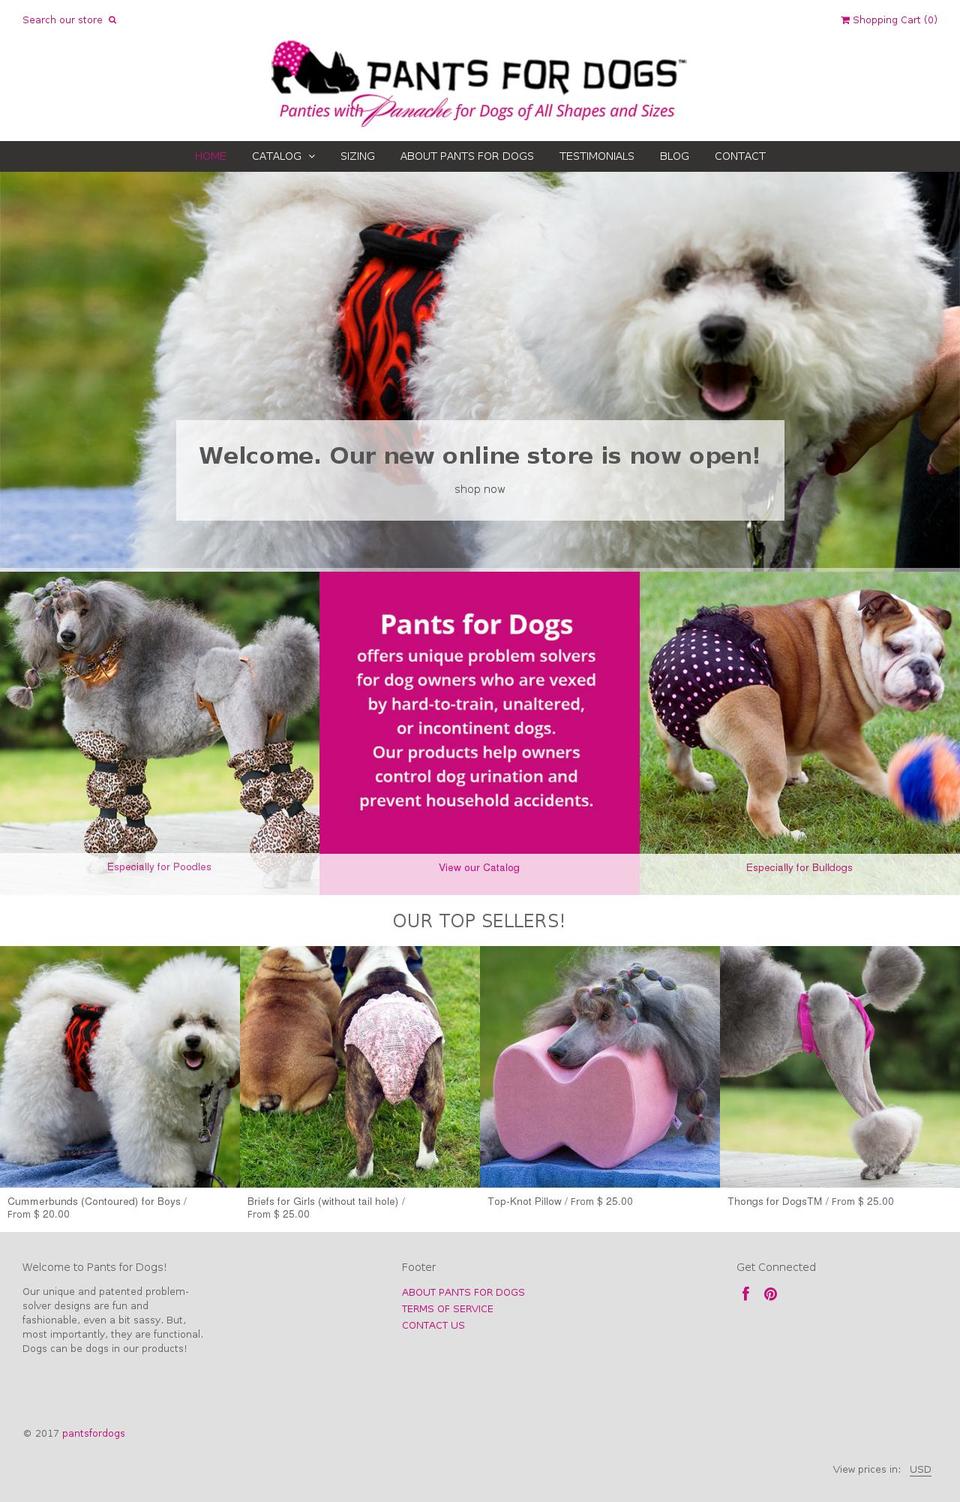 Weekend Shopify theme site example pantsfordogs.com